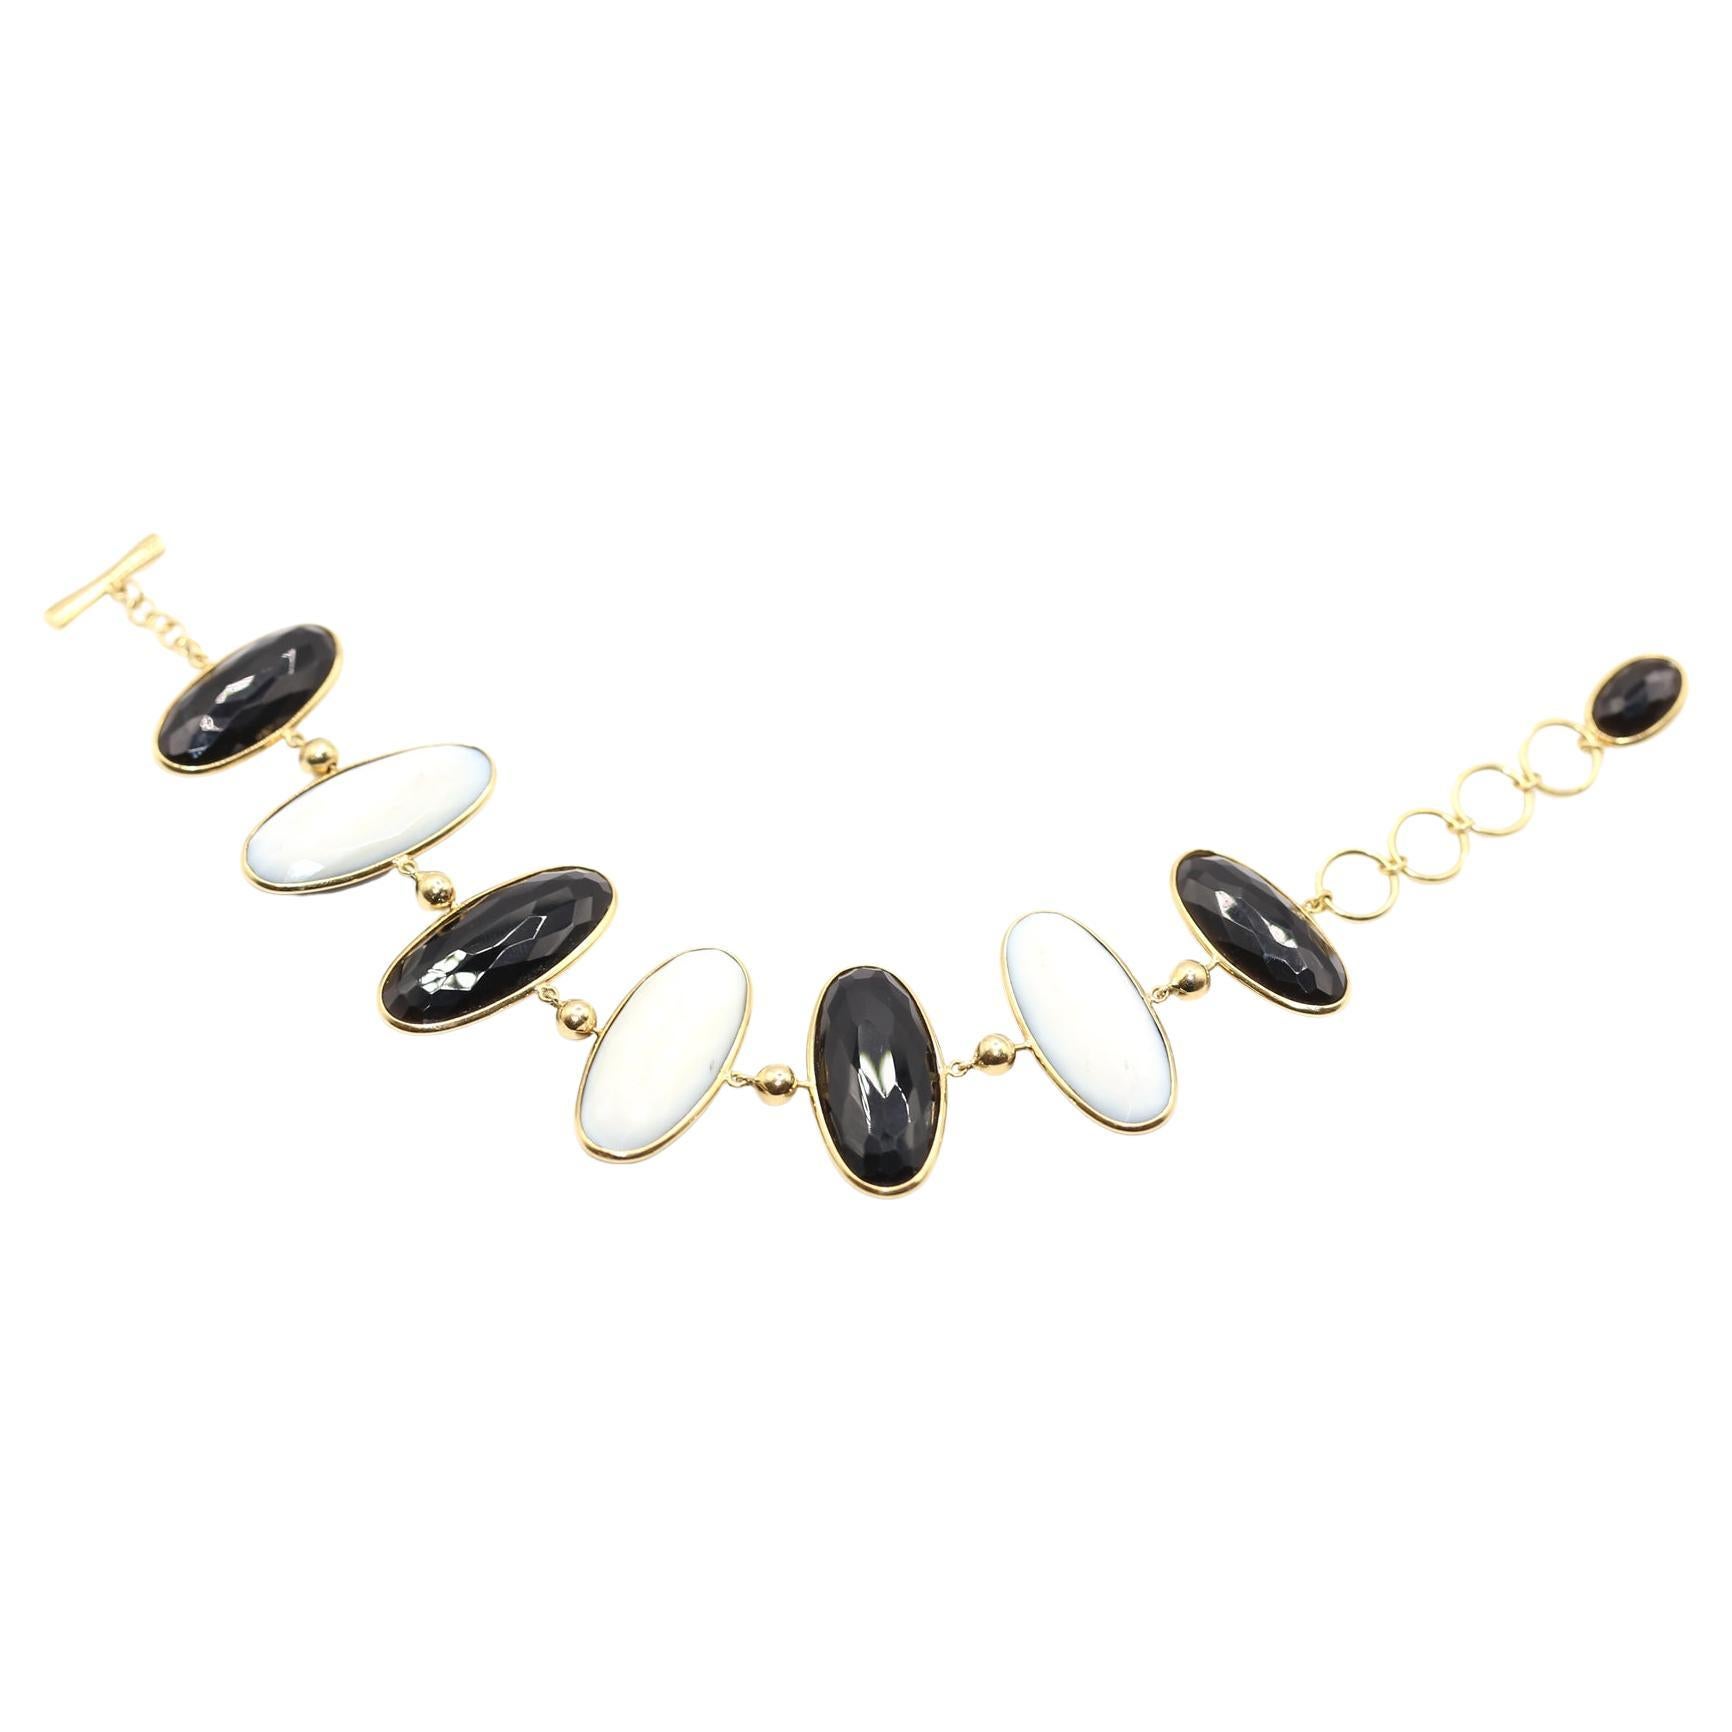 Black Onyx  and white Mother-Of-Pearl Toggle (Double Sided) Bracelet. Set in  18K Yellow  Gold. Created around  1970.

Eight double sided oval plaques of black Onyx and white Mother-of-pearl. Each one can be individually turned around.
Set in 18